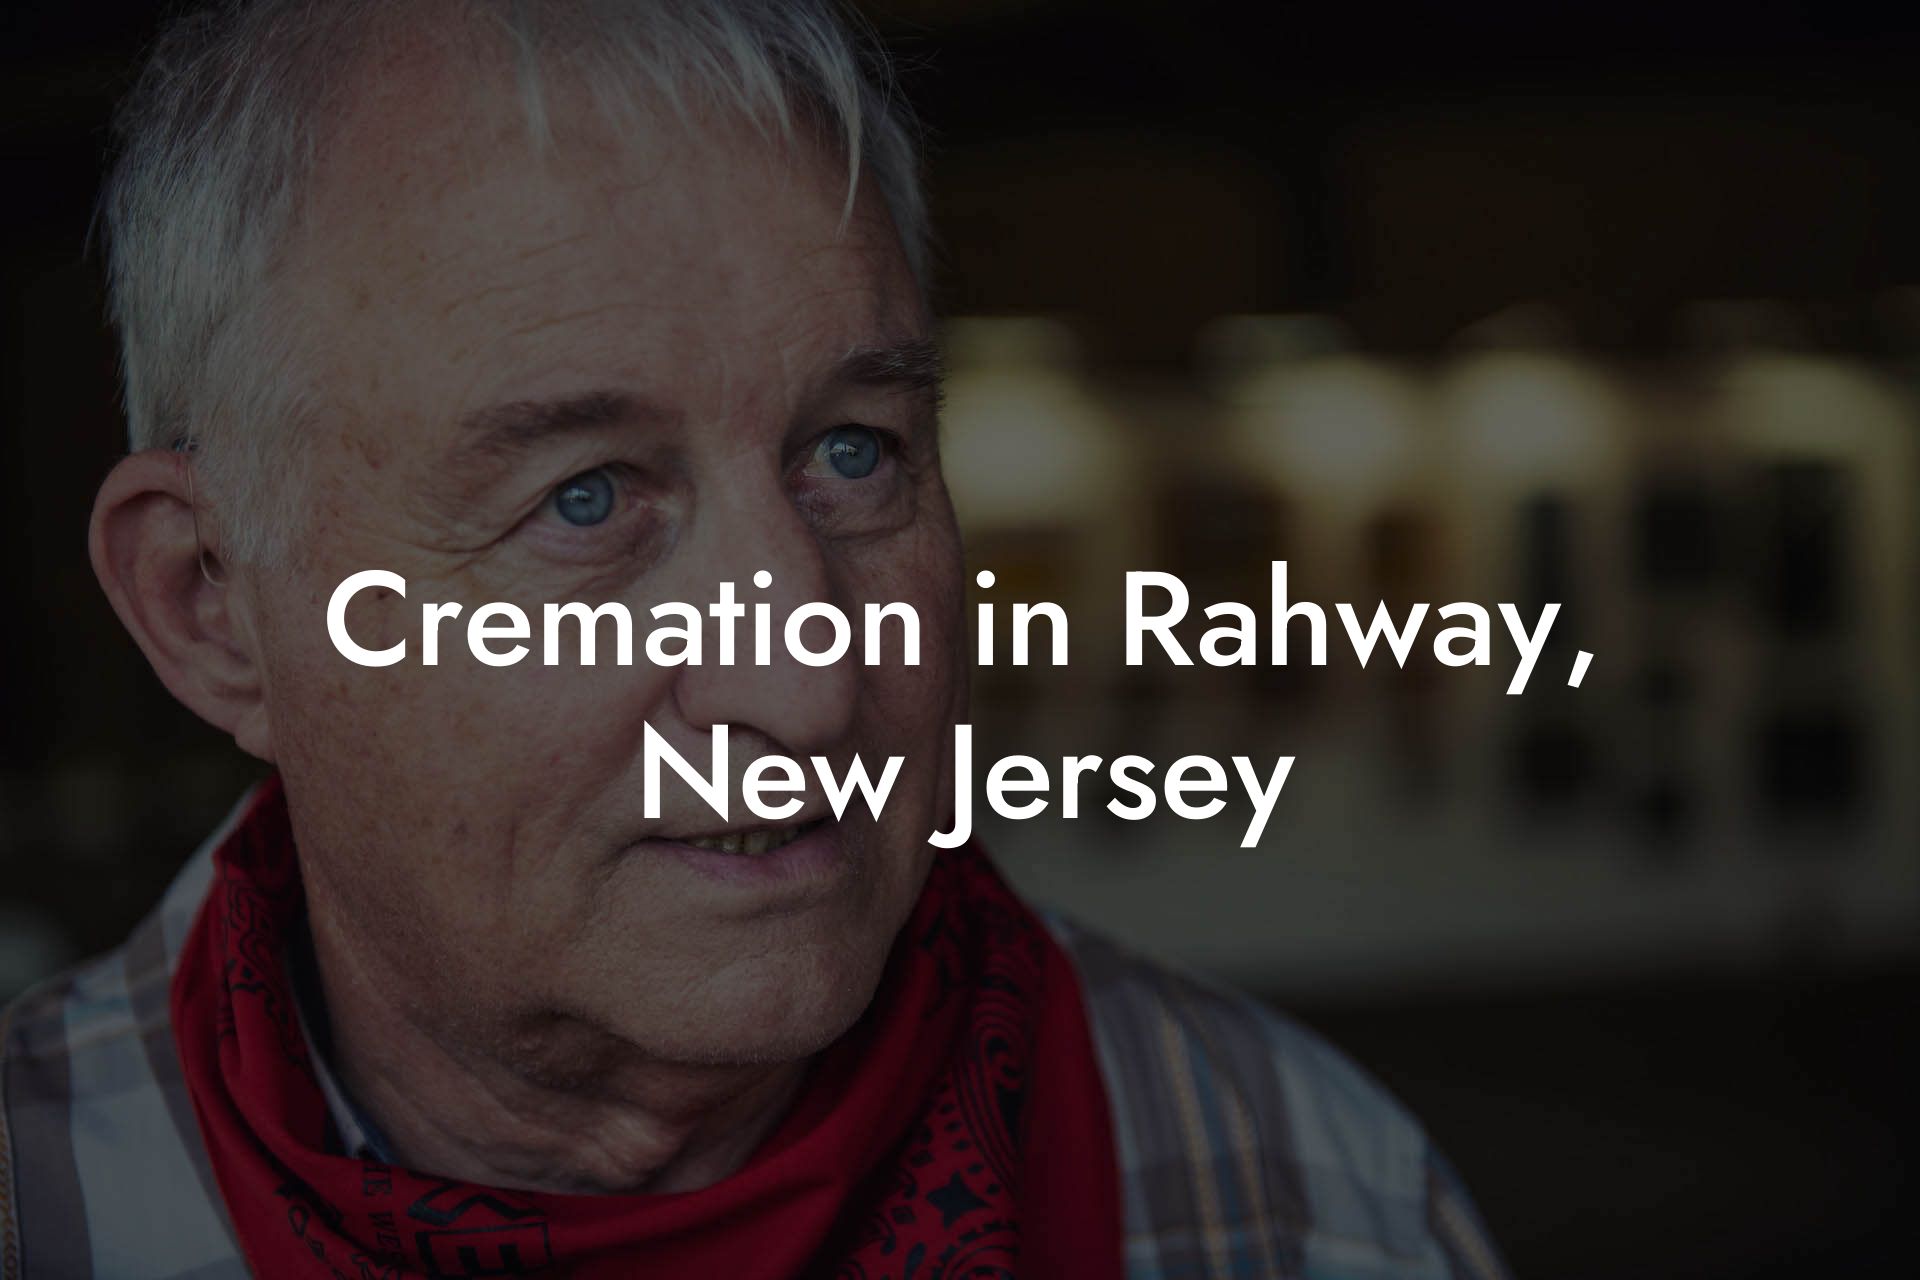 Cremation in Rahway, New Jersey